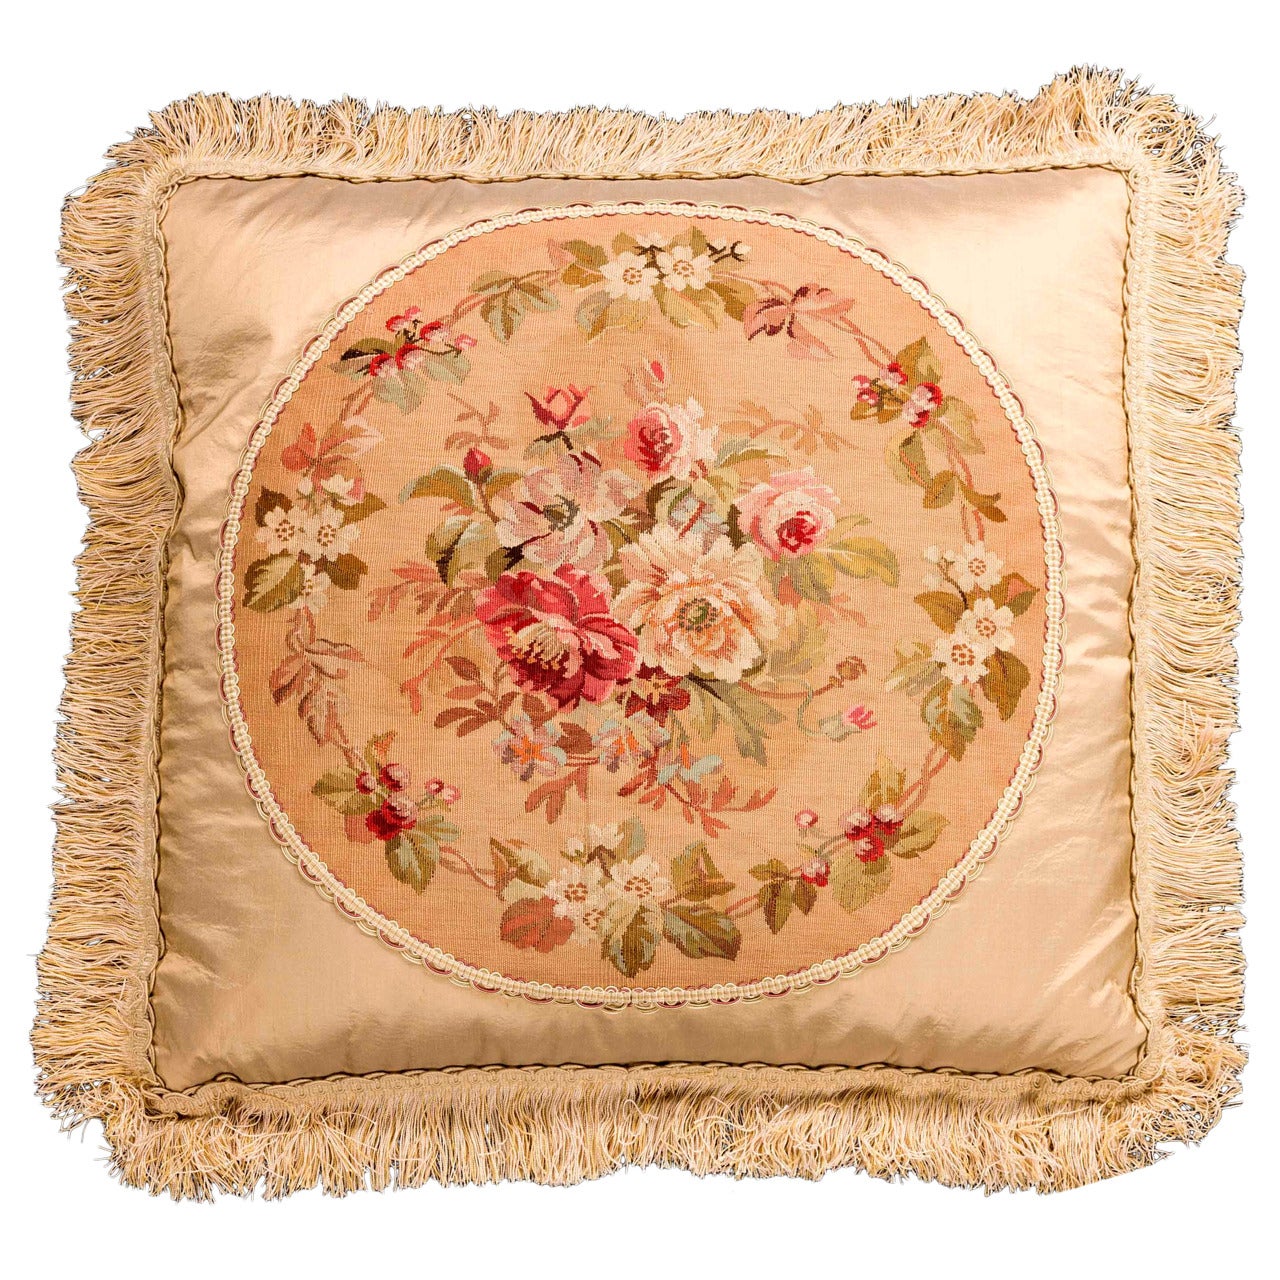 Cushion: 18th Century, Wool. A Bouquet of Flowers